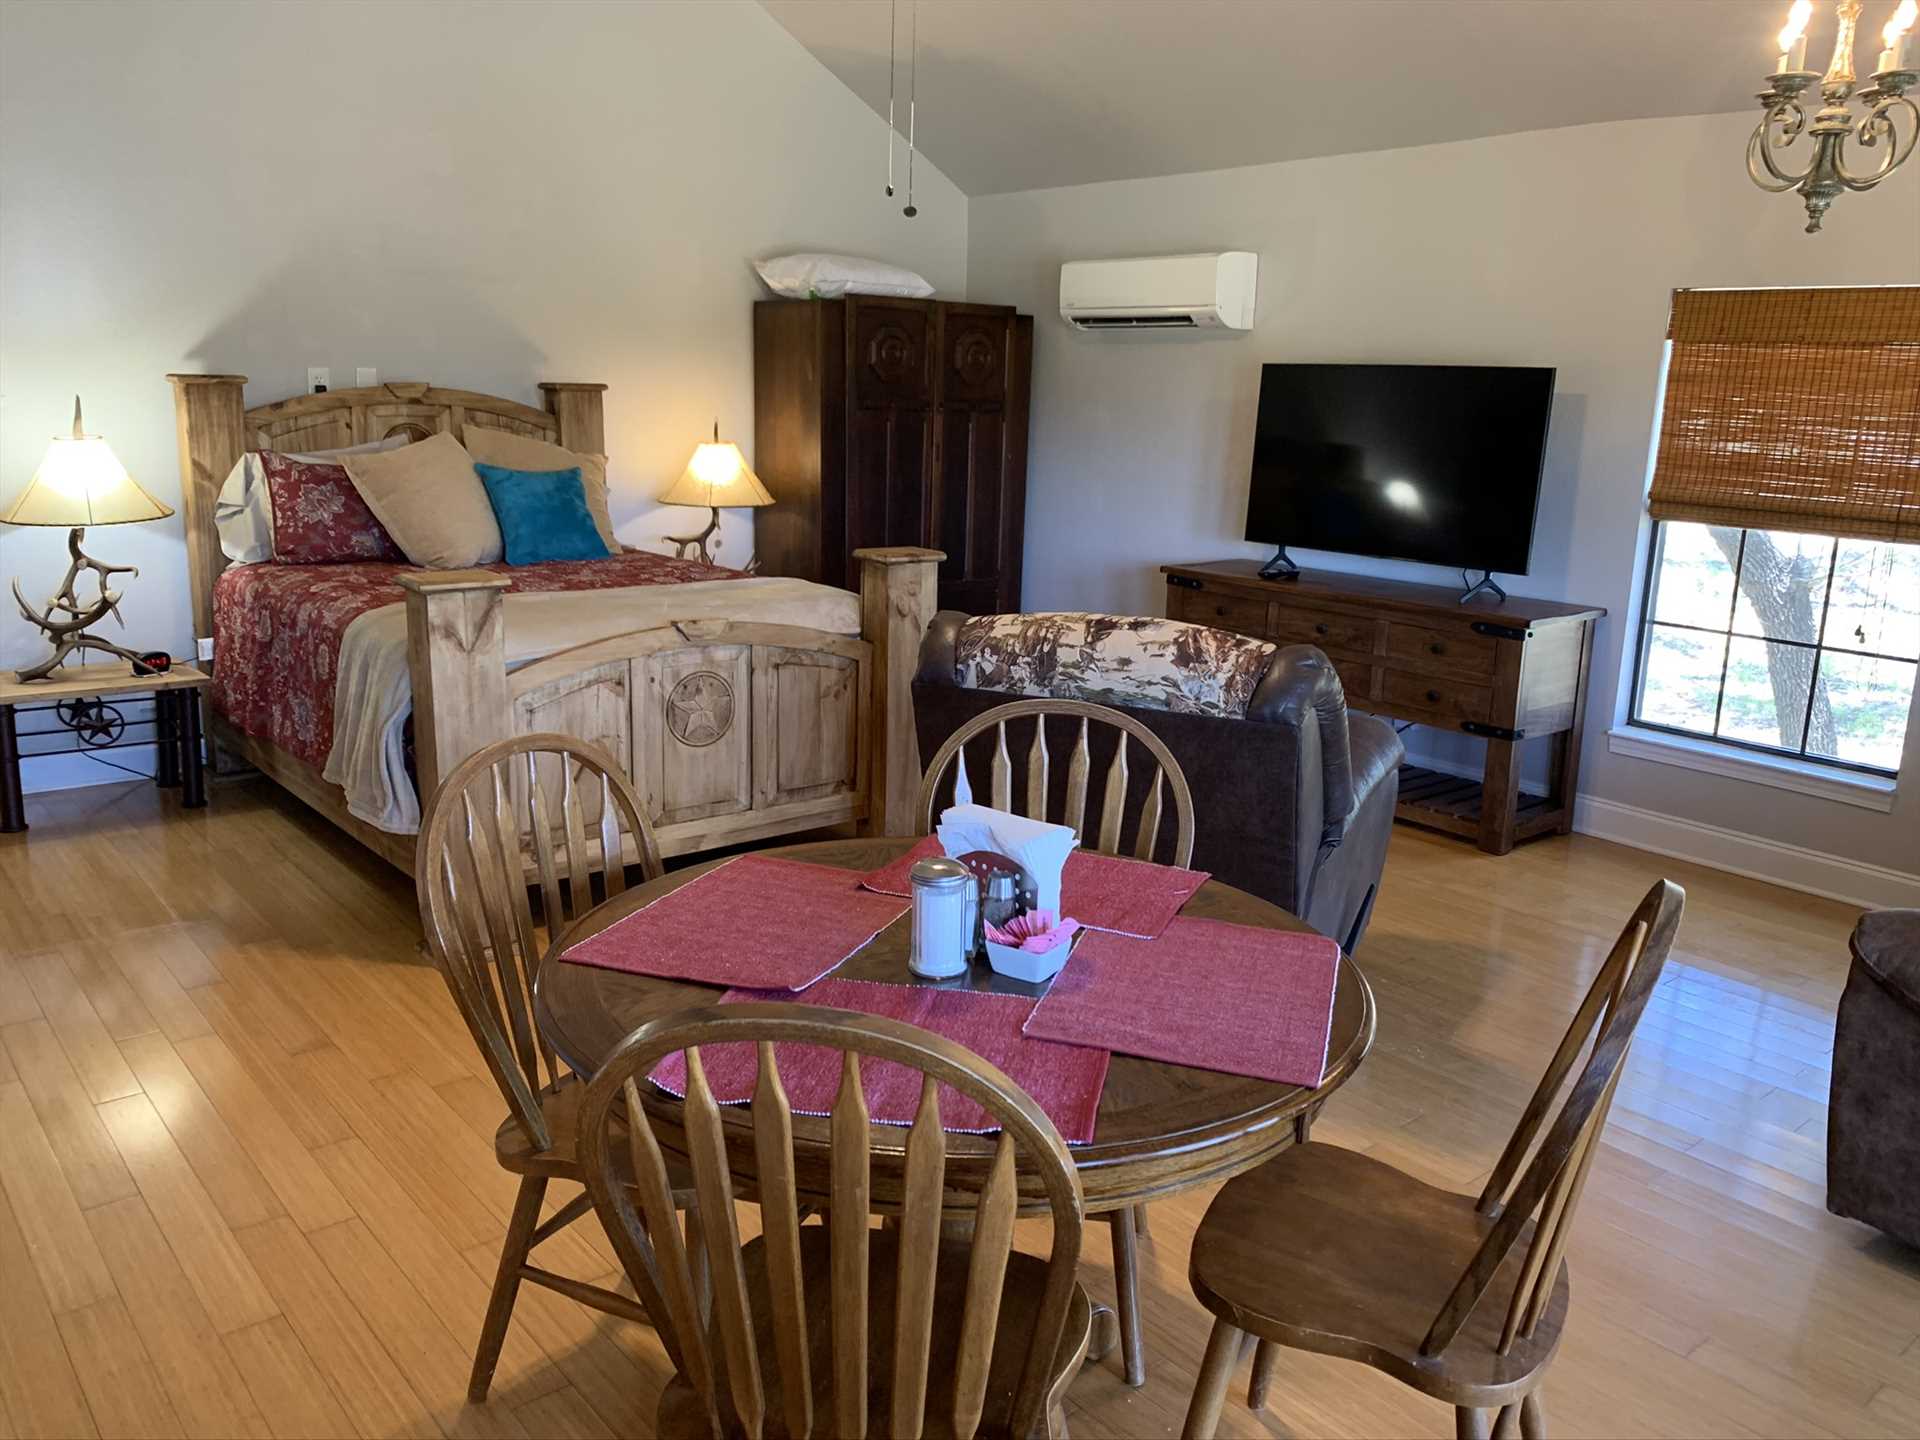                                                 AC and heat, satellite TV with over 200 channels, Wifi Internet and cell service, and even a roll-away bed for a third guest are among the luxuries you'll find at the Hideout.